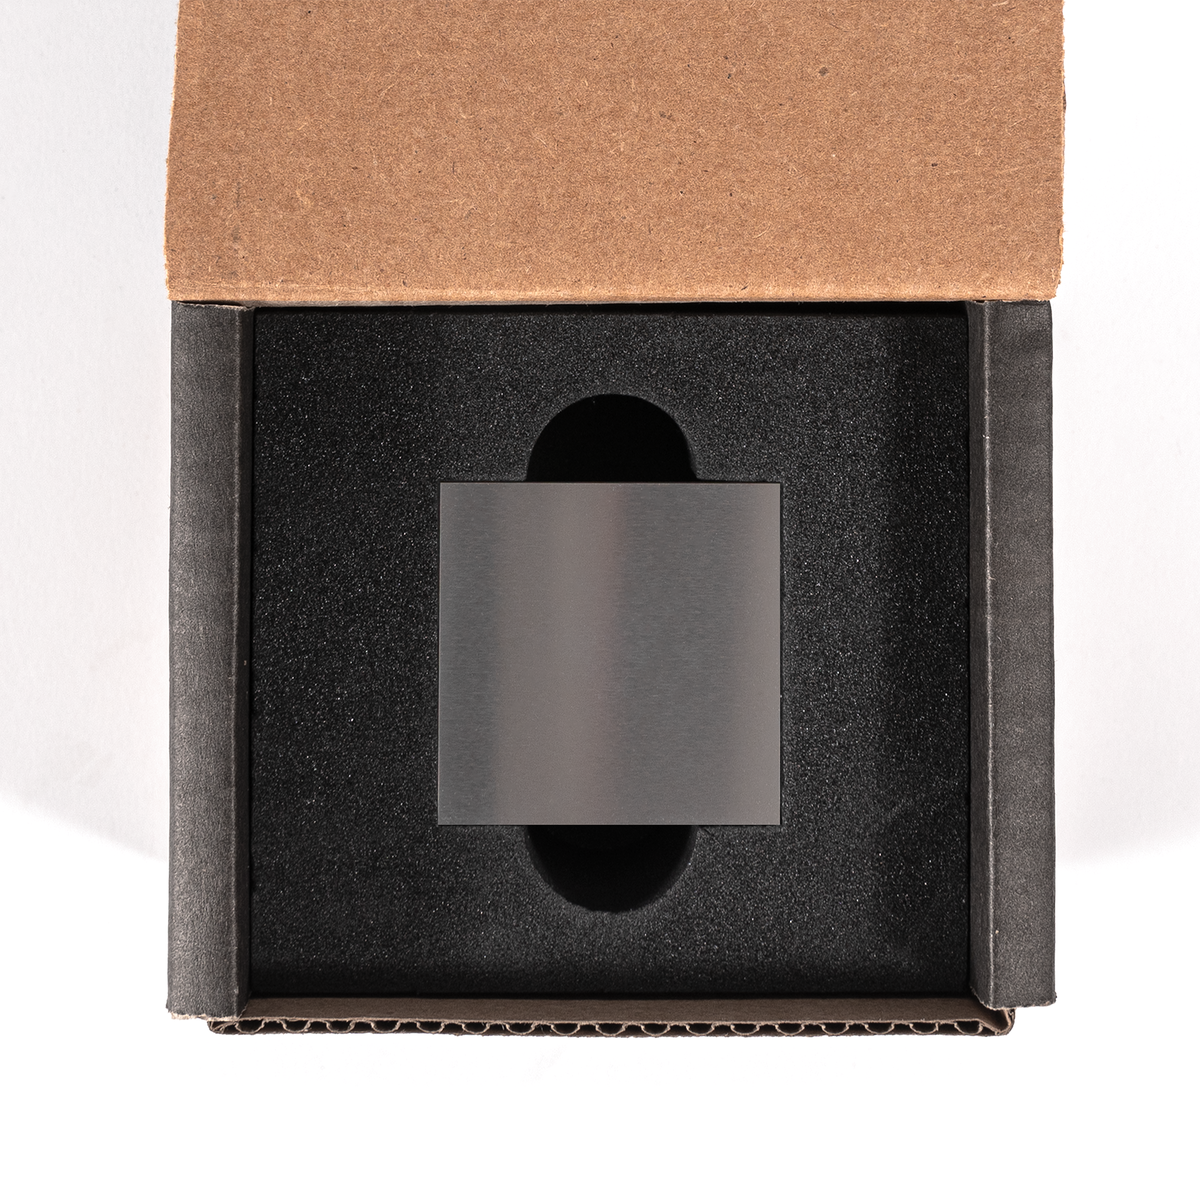 Kraft Paper Take Out Container 2.5 in x 5.2 in